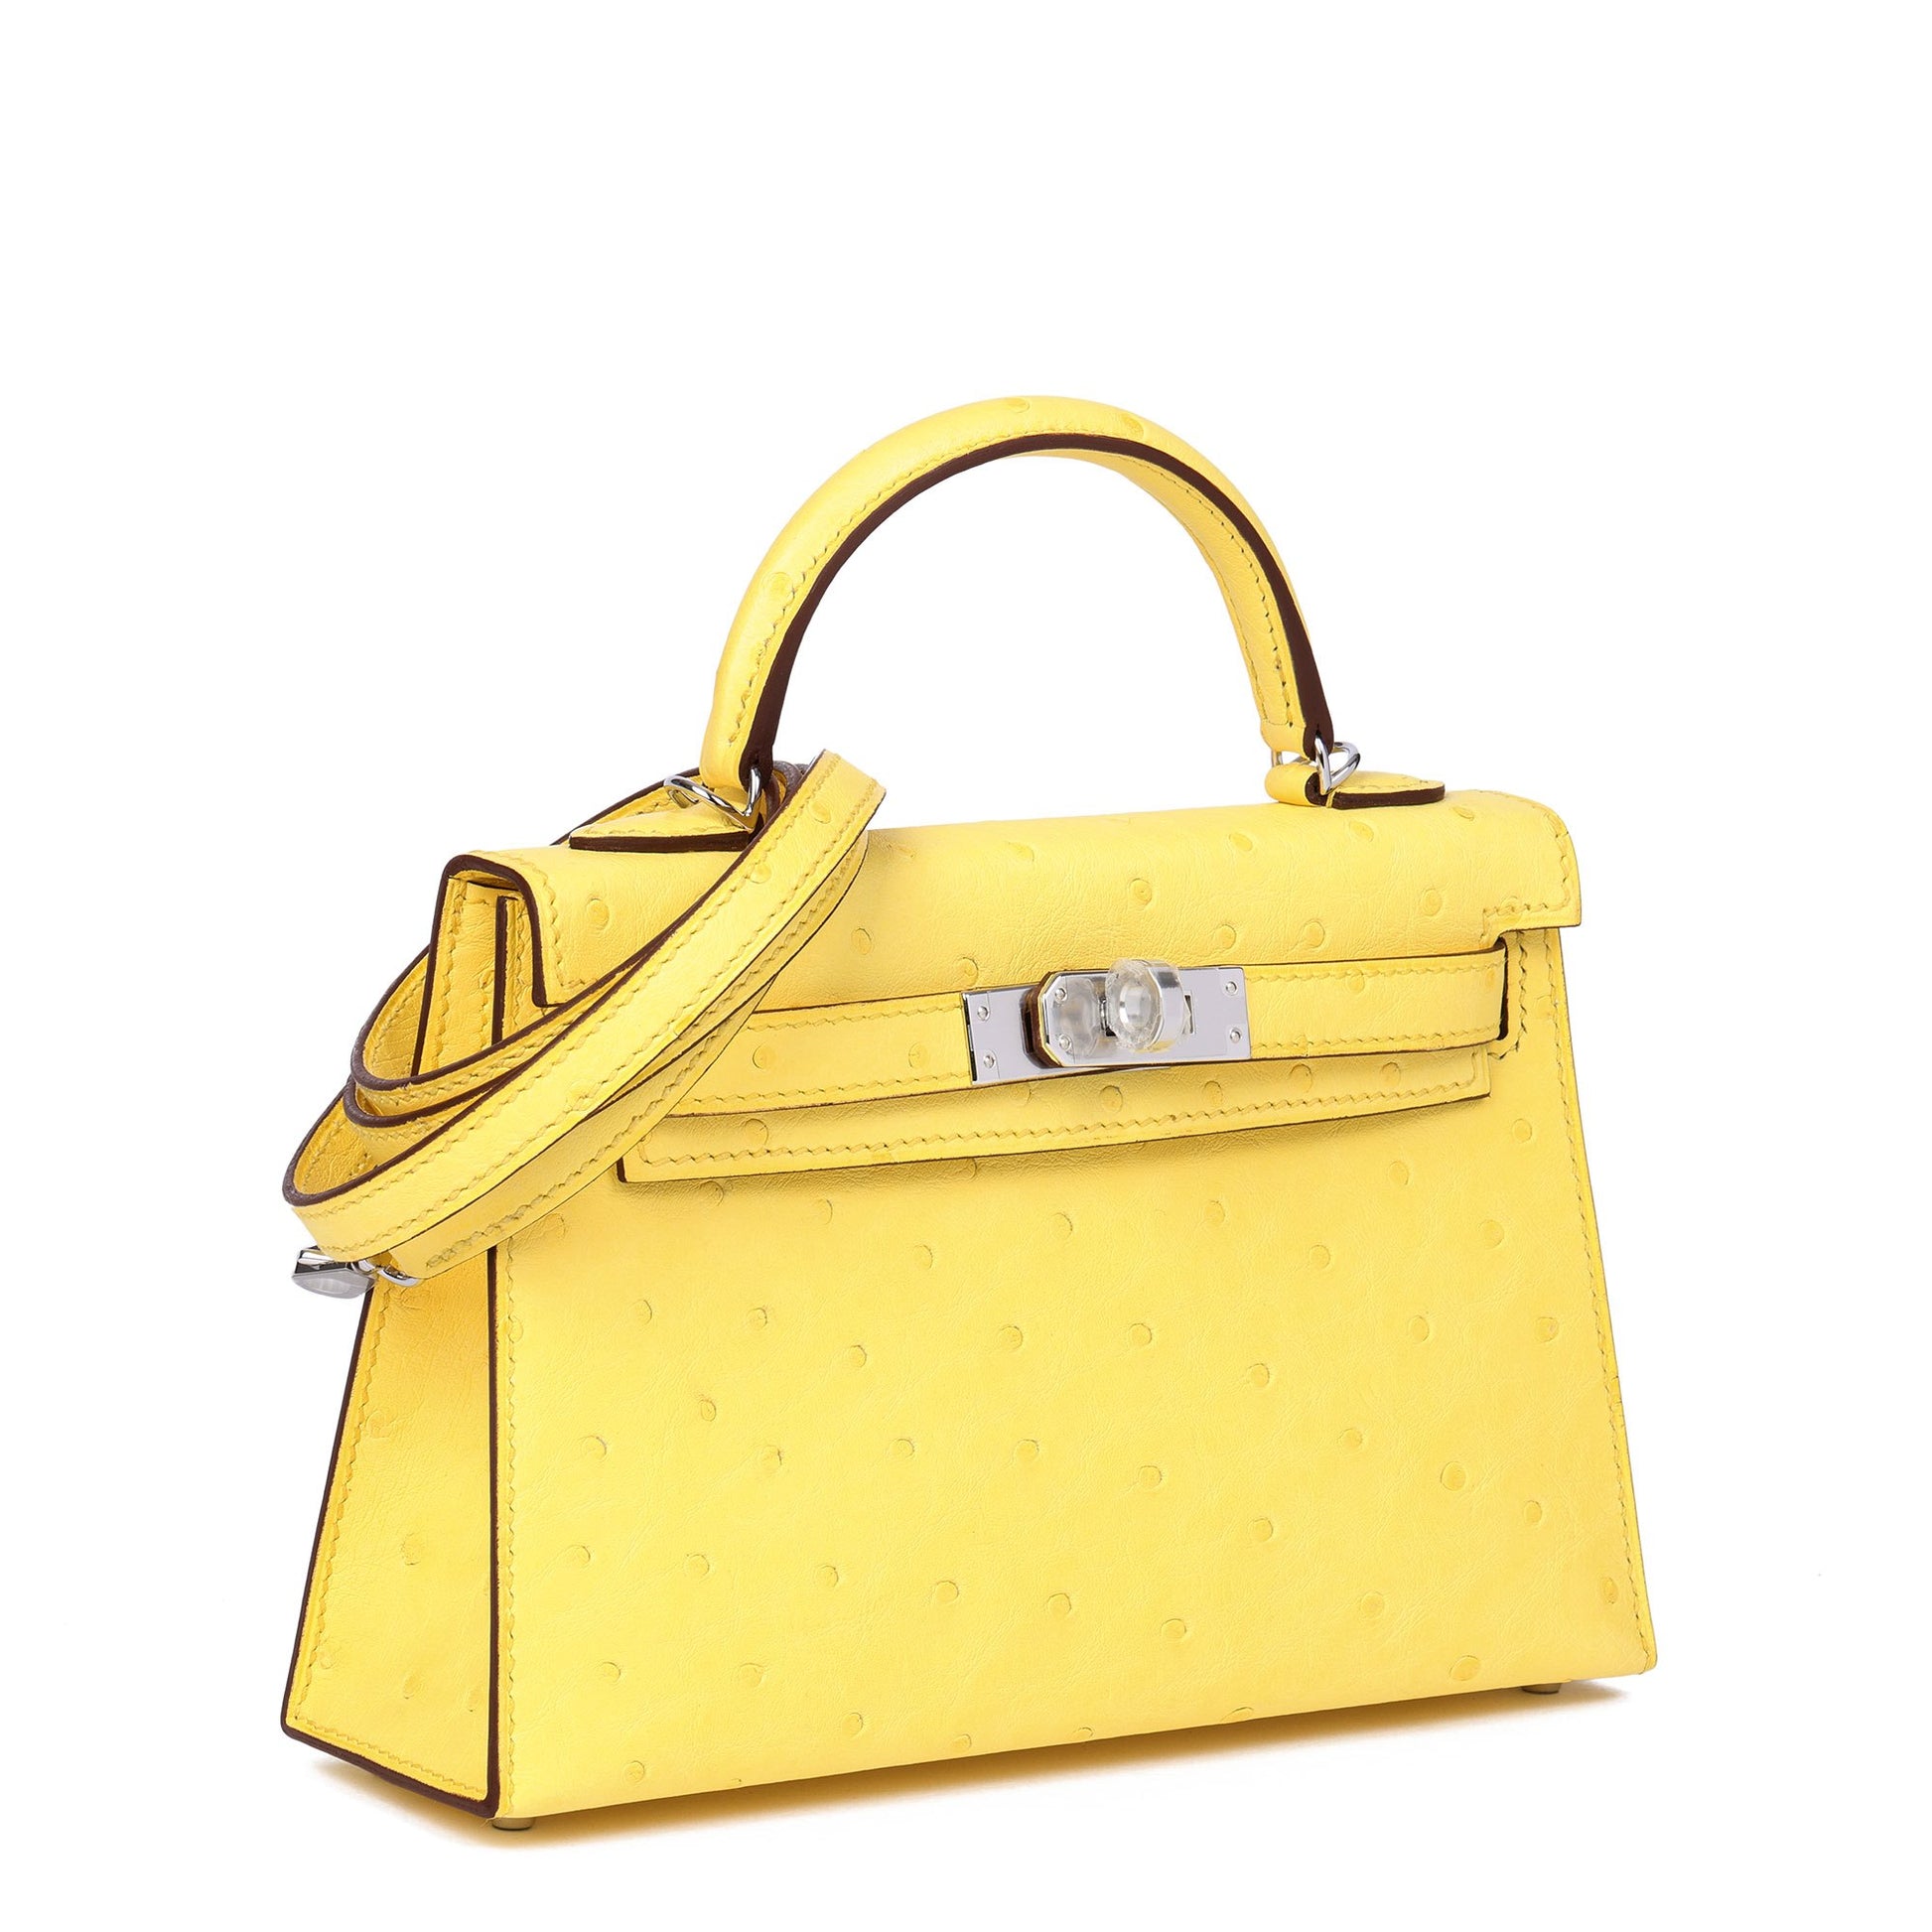 Hermes Yellow Ostrich Leather Small Top Handle Satchel Shoulder